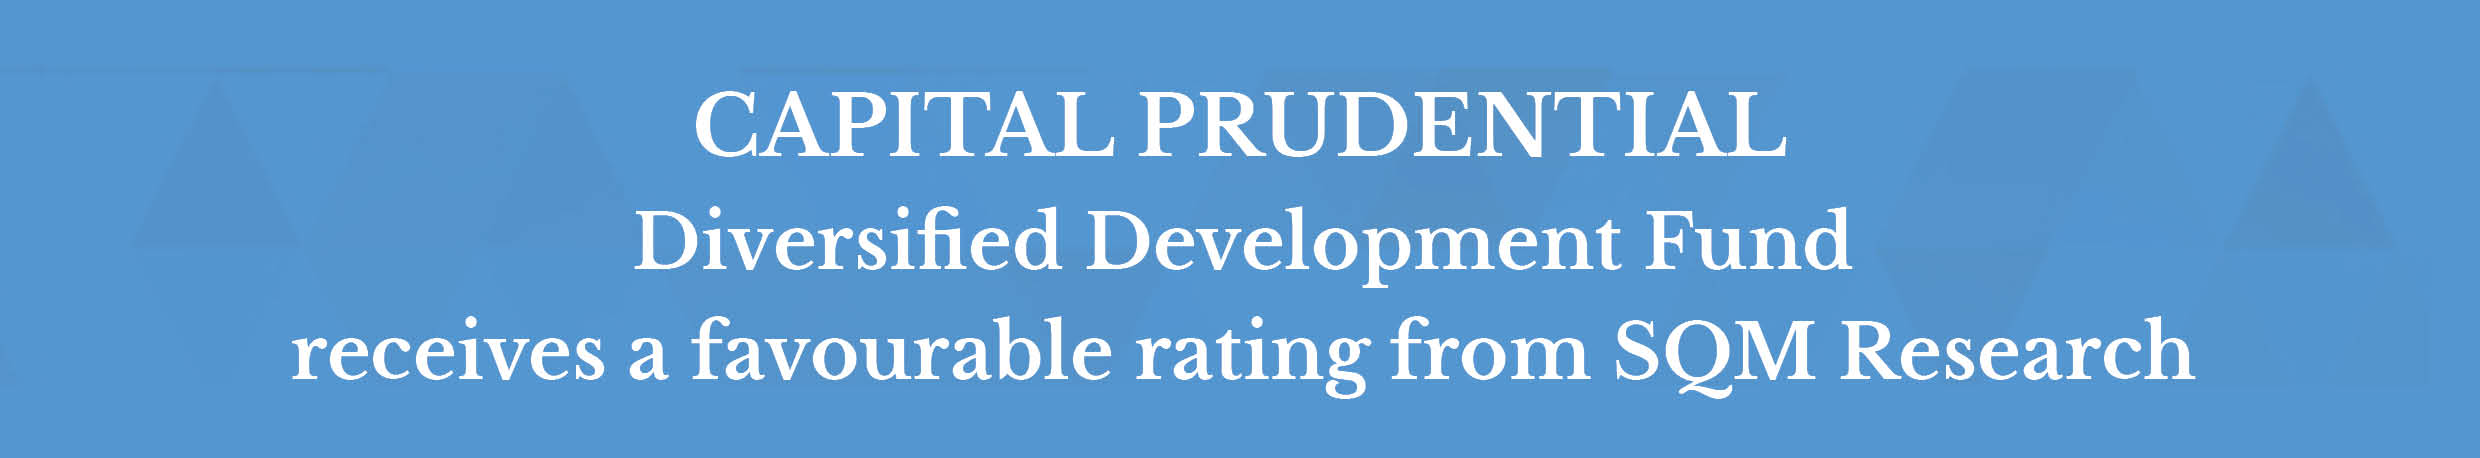 Capital Prudential Diversified Development Fund receives a favourable rating from SQM Research